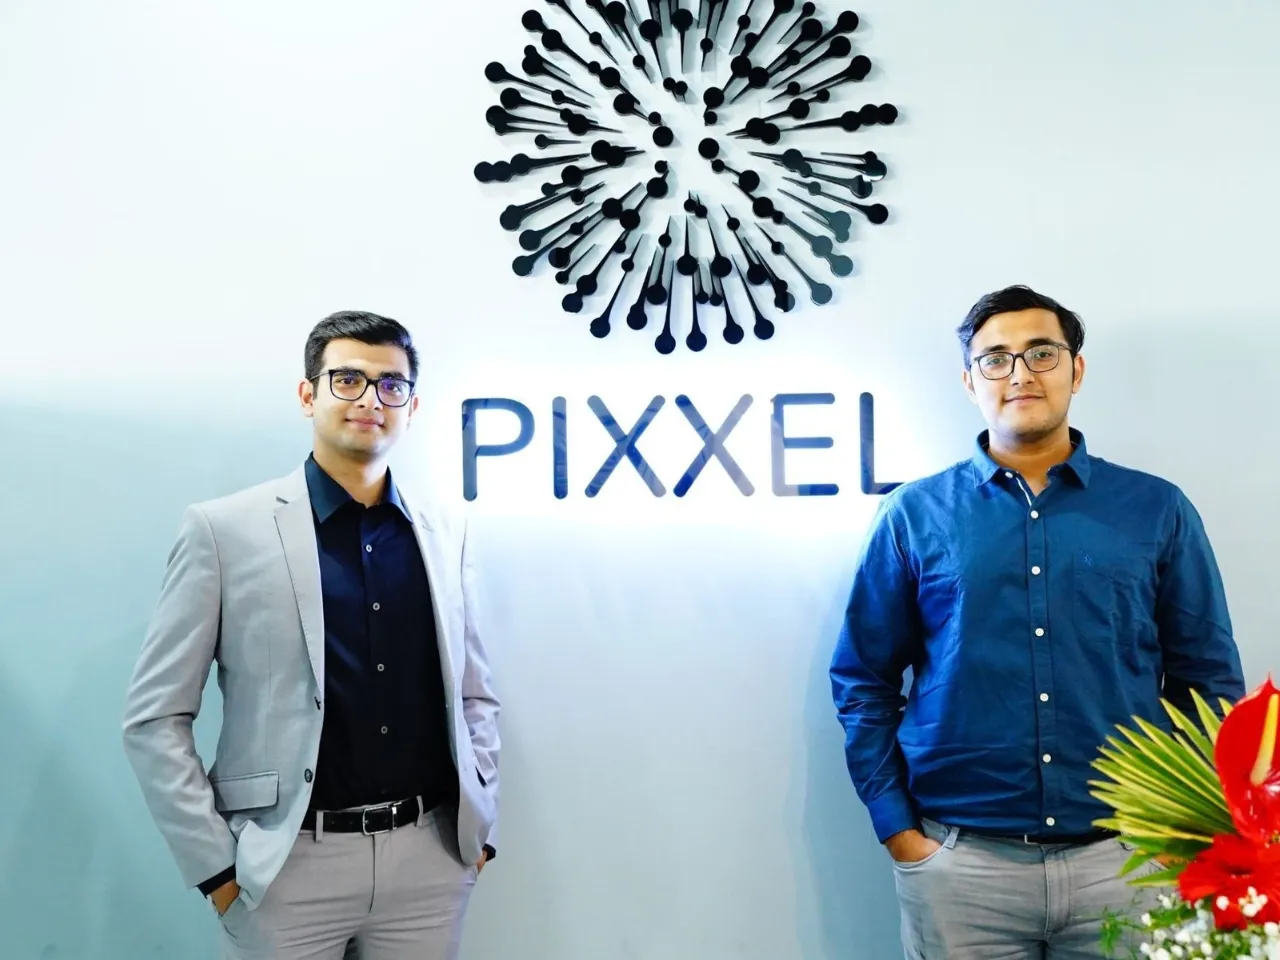 Google, others invests $36M in satellite imaging startup Pixxel